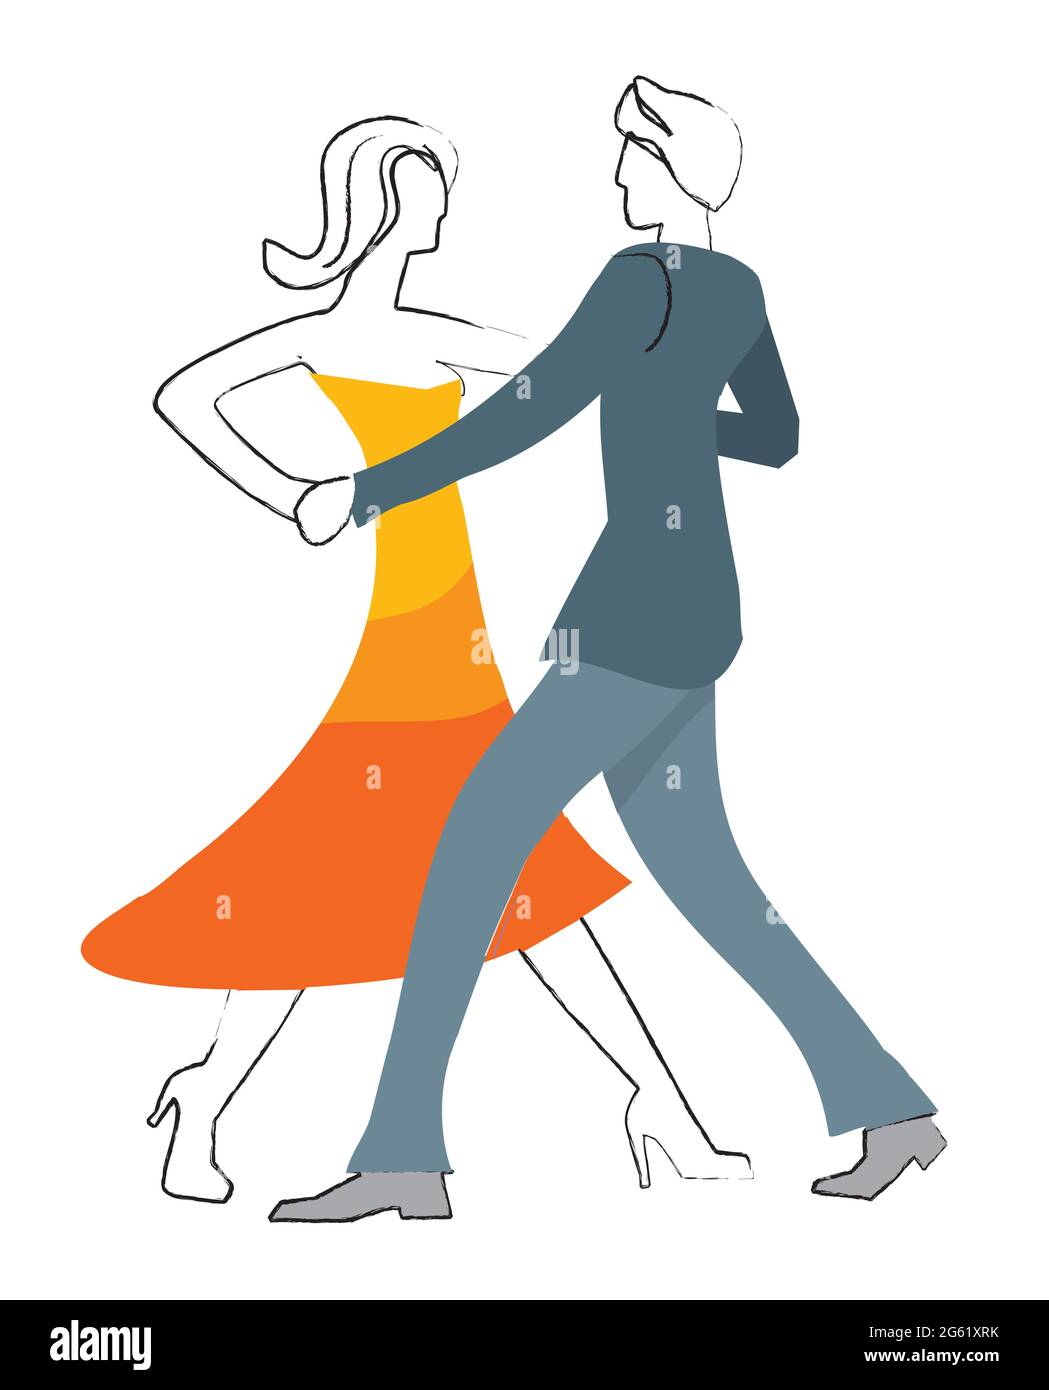 Balroom Dancers Couple. Stylized illustration of couple dancing ballroom dance on white background. Vector available. Stock Vector